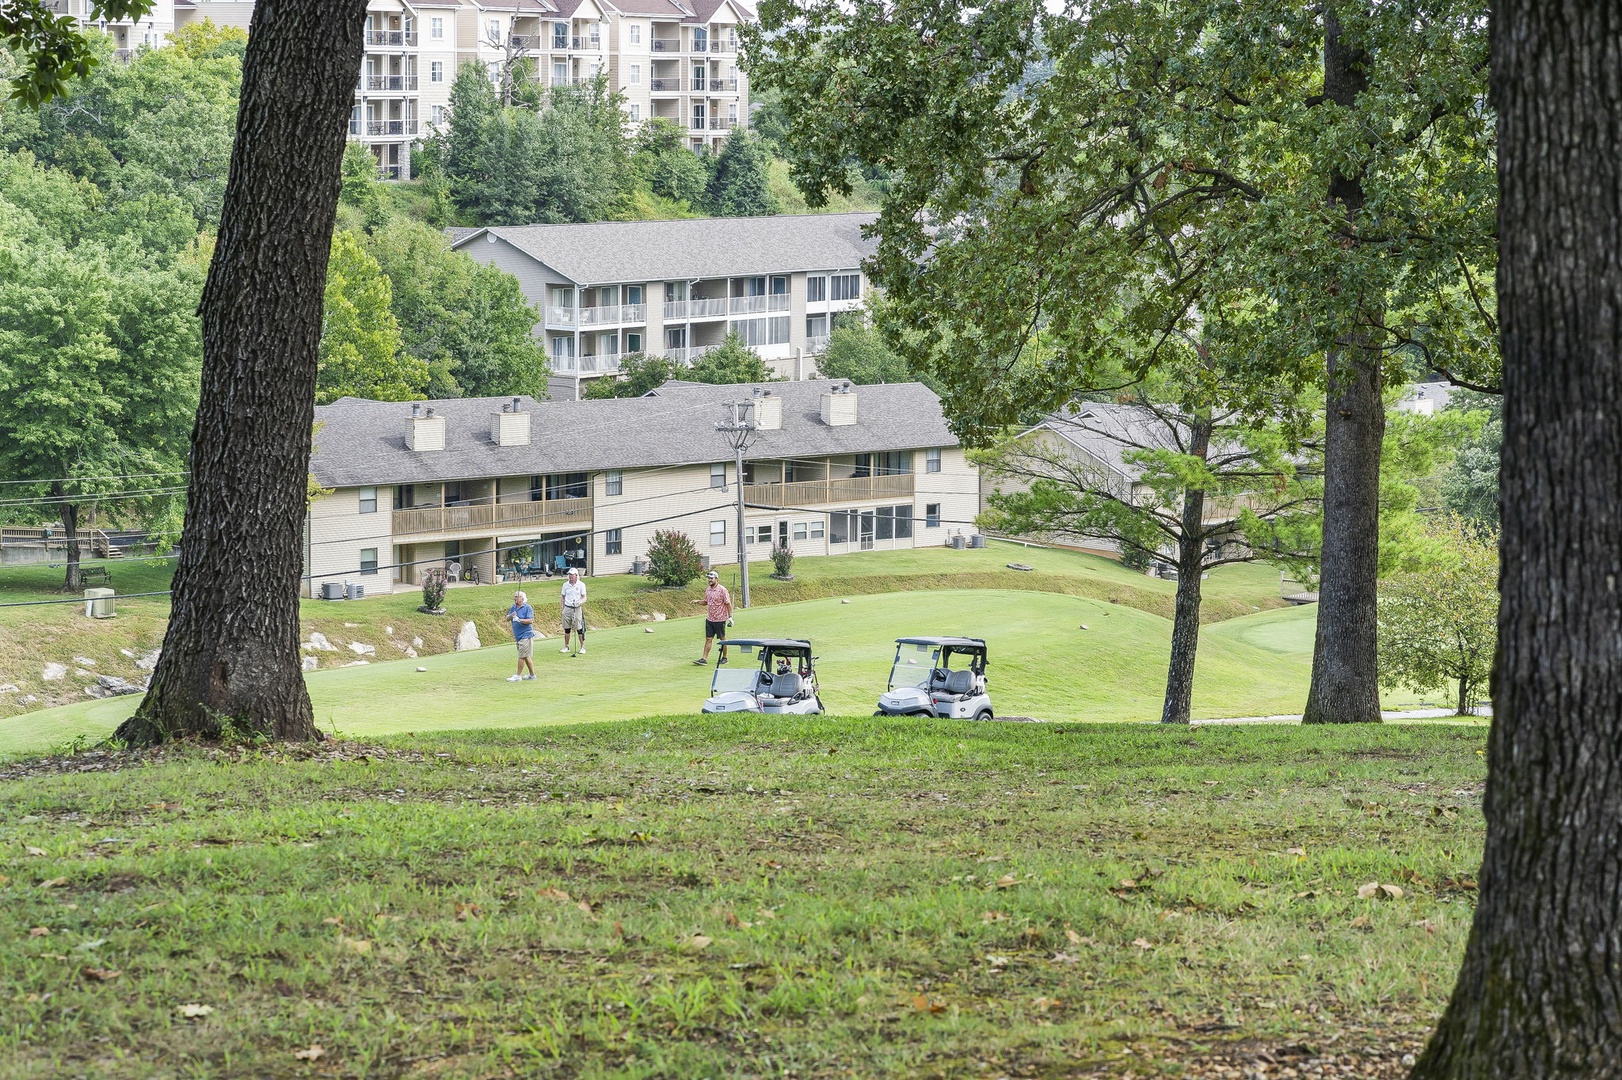 This condo’s location is ideal for golfers!